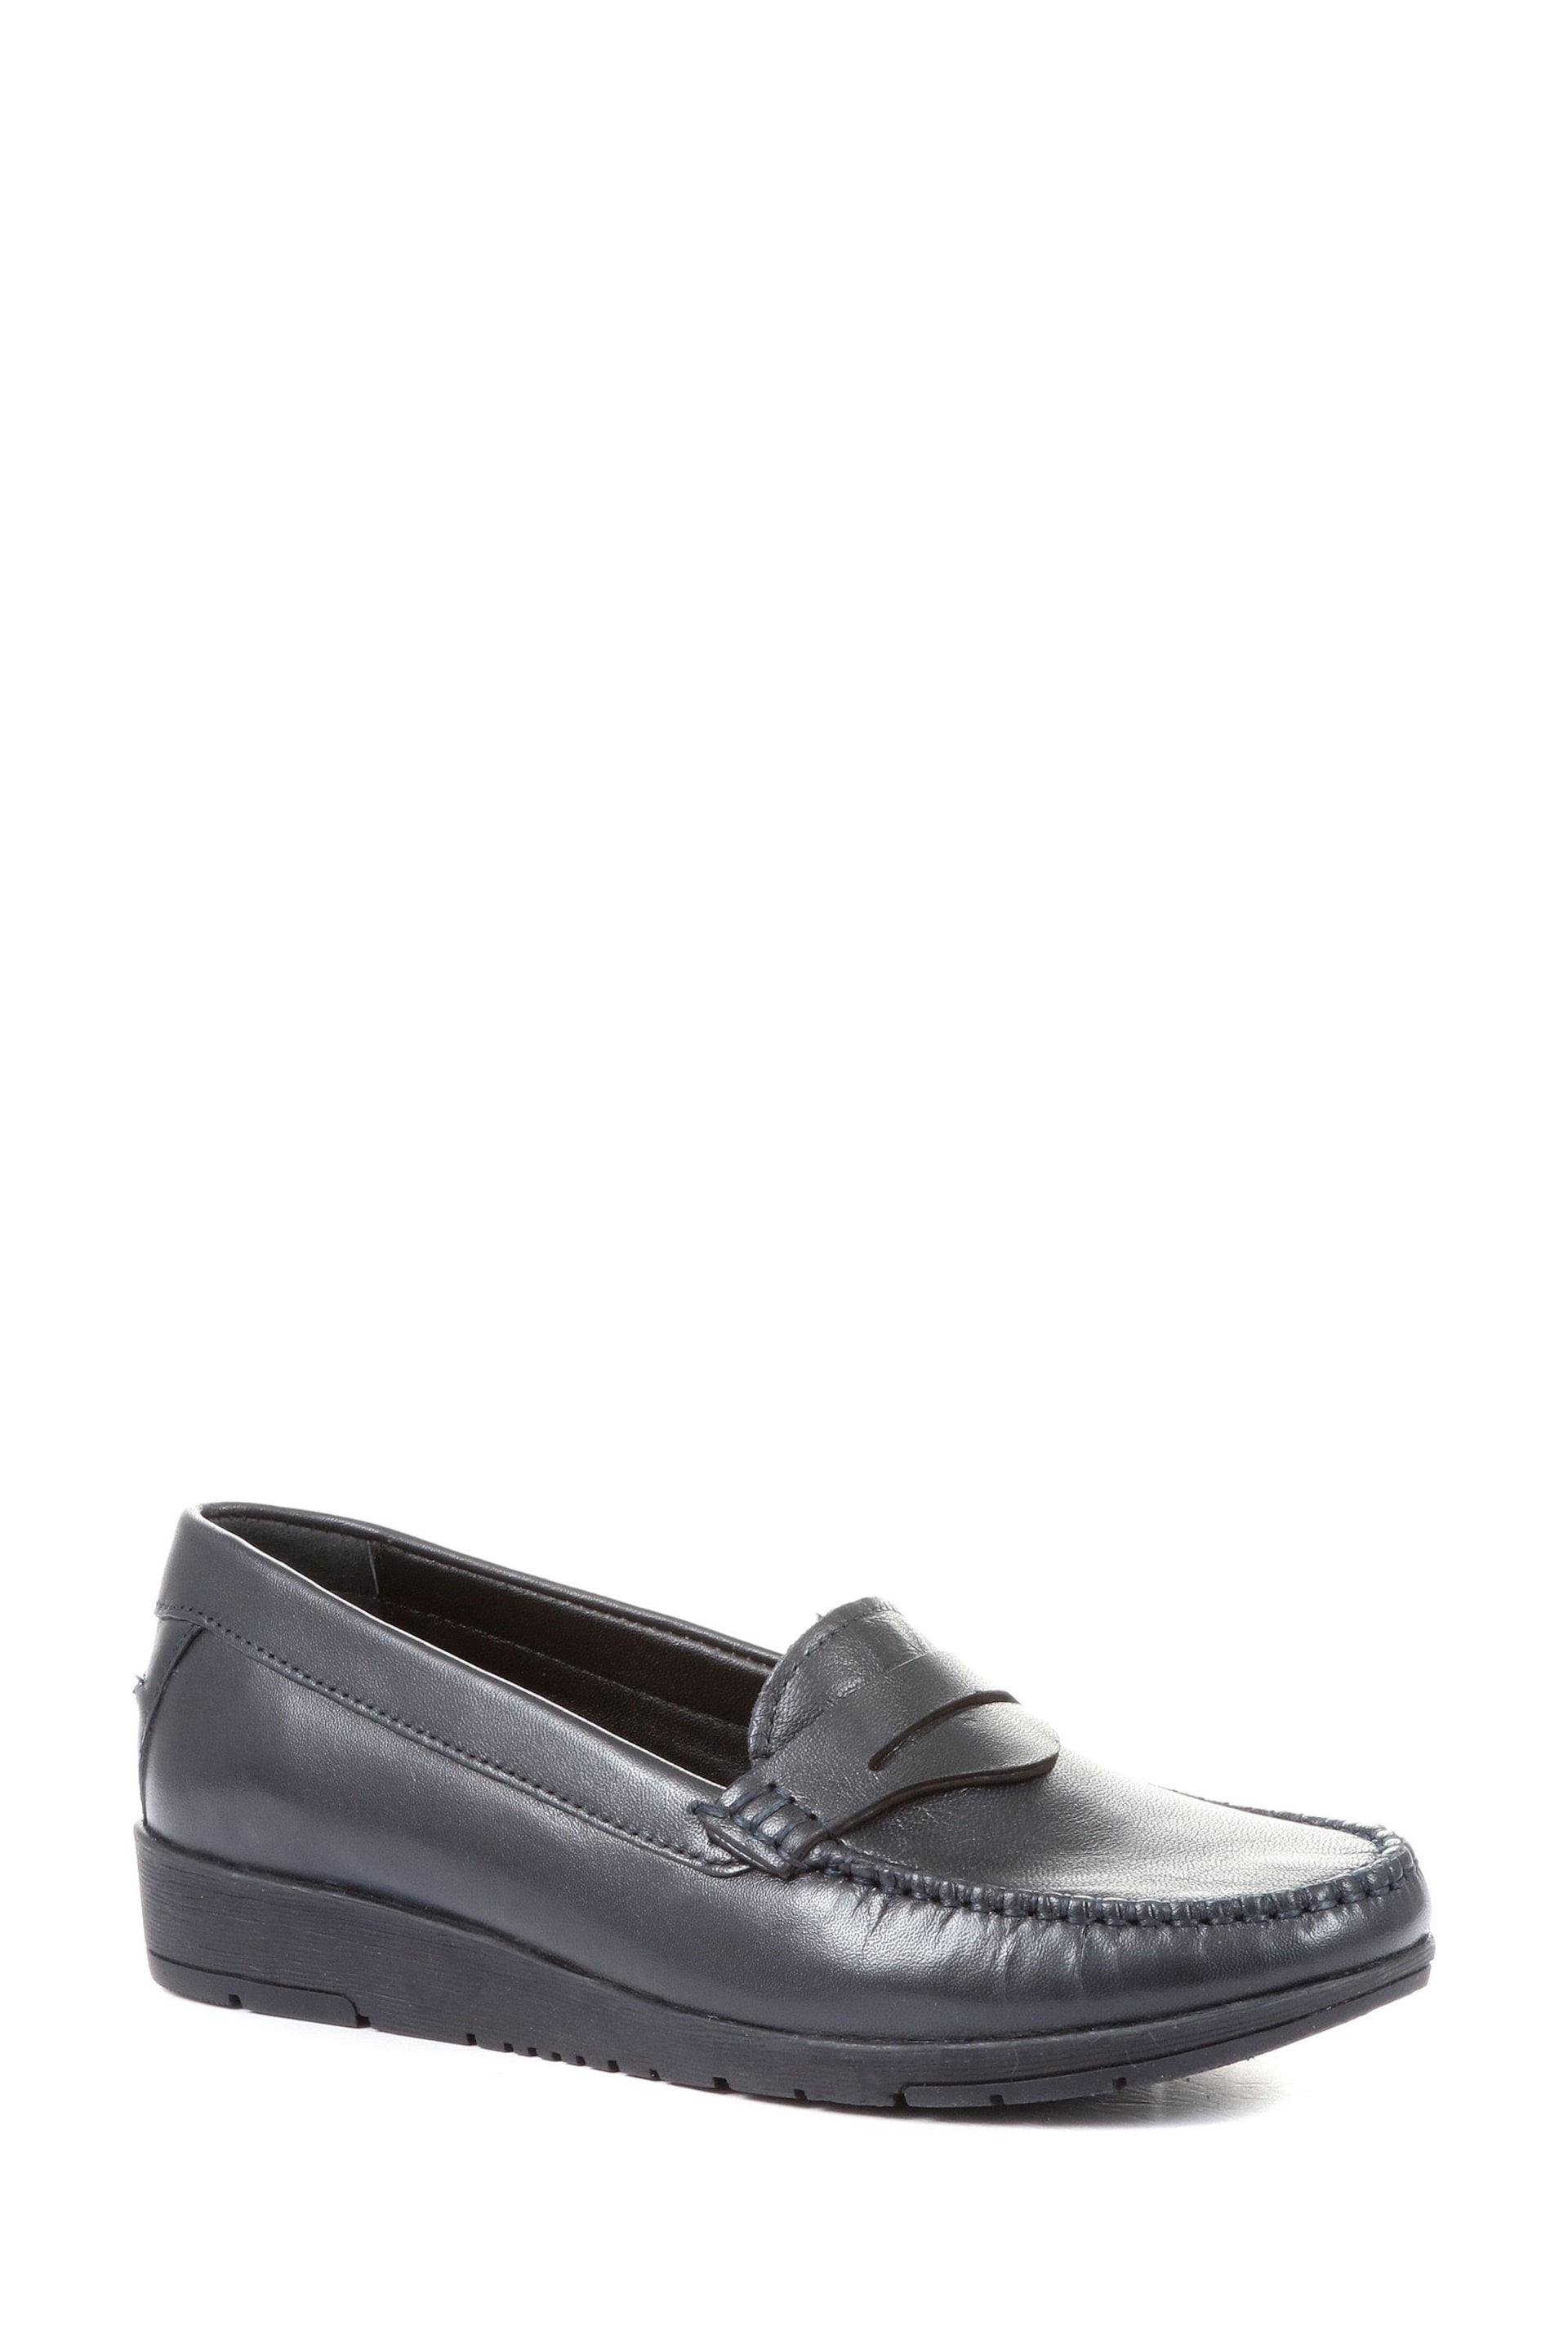 Pavers Blue Wide Fit Leather Penny Loafers - Image 2 of 7